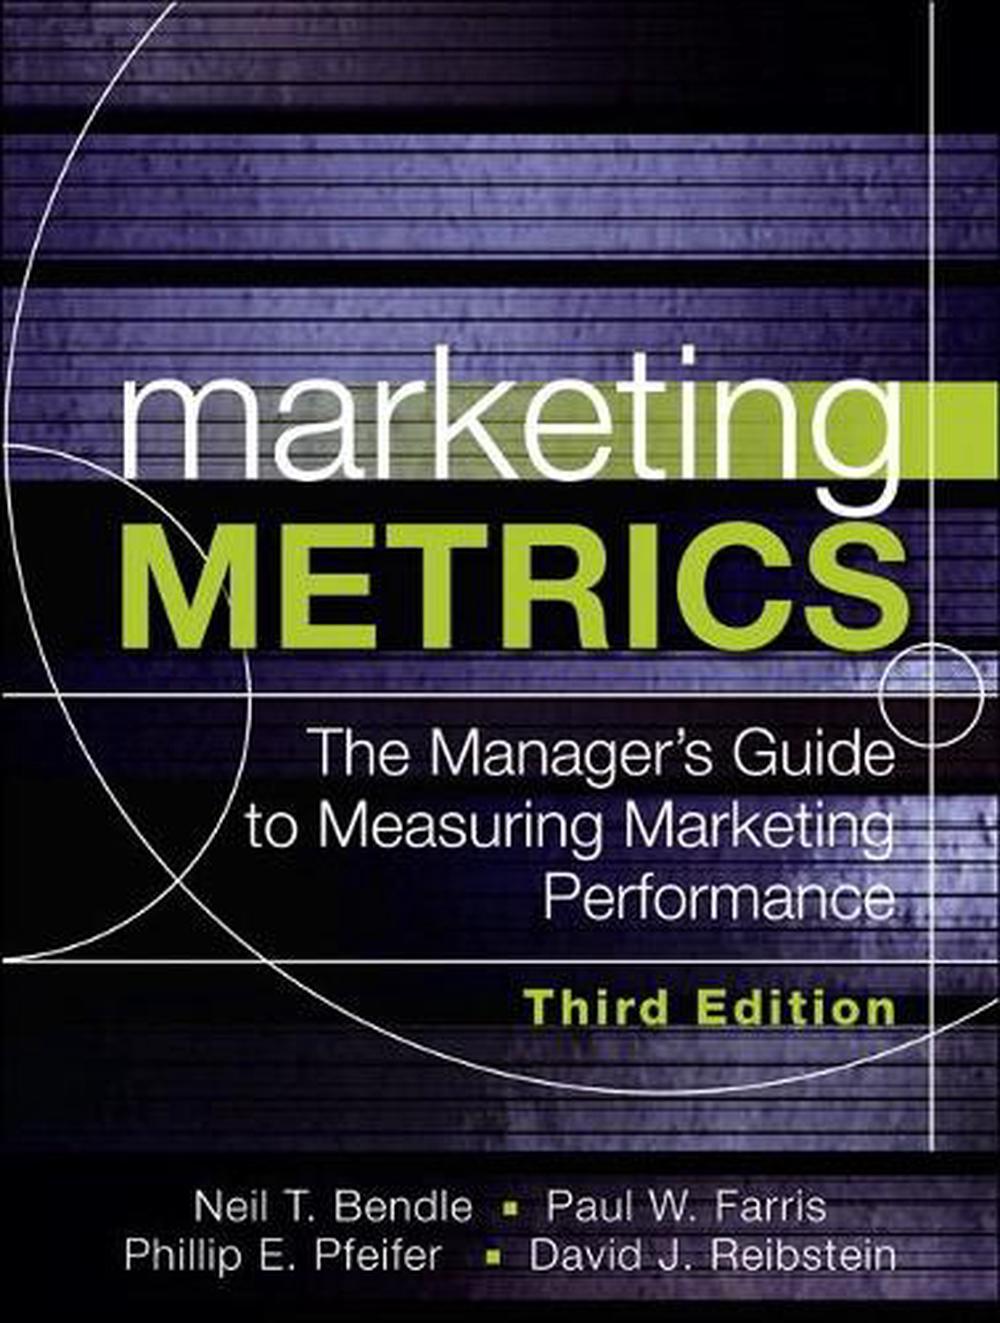 Marketing Metrics: The Manager's Guide to Measuring Marketing Performance 3rd Ed 9780134085968 ...